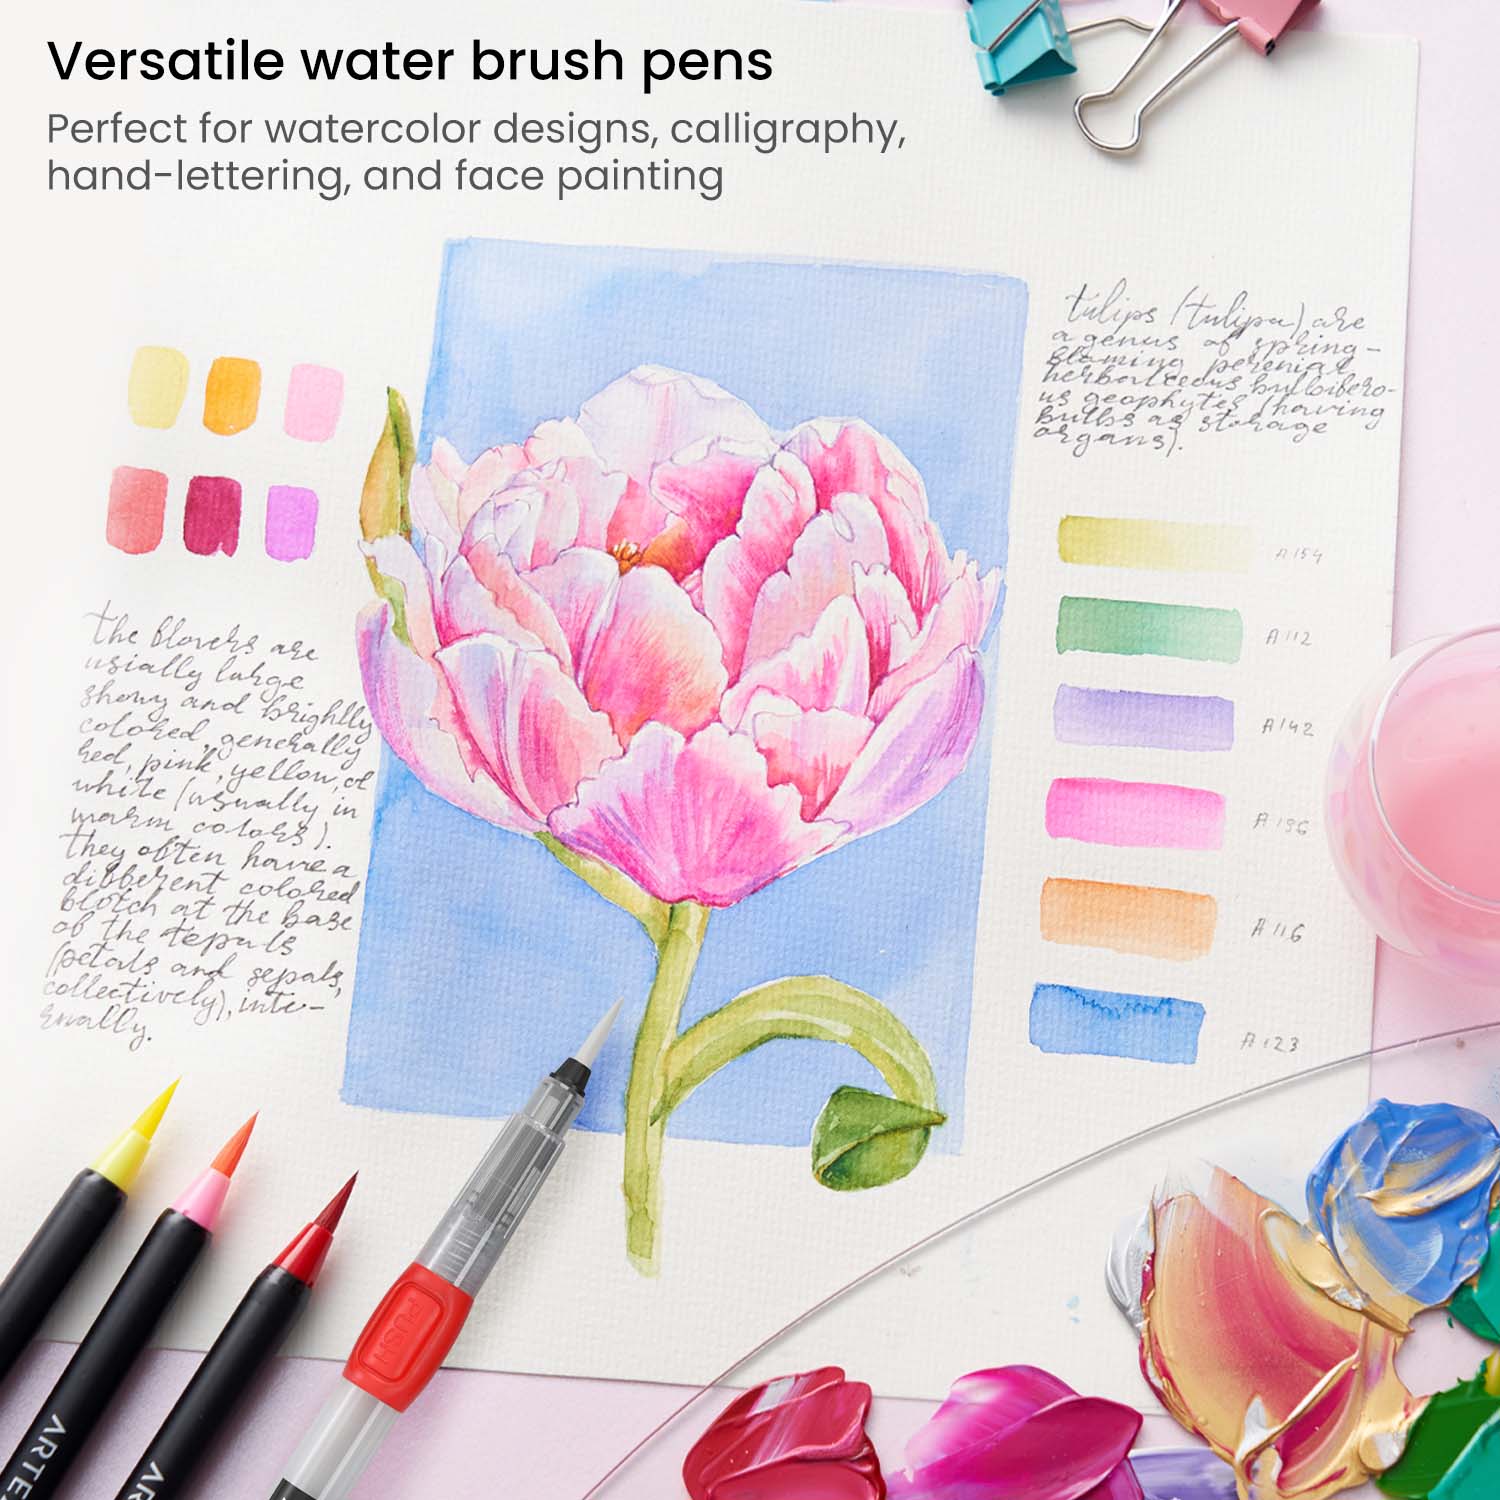 Dive into a world of vibrant possibilities with Arteza Brush Pens